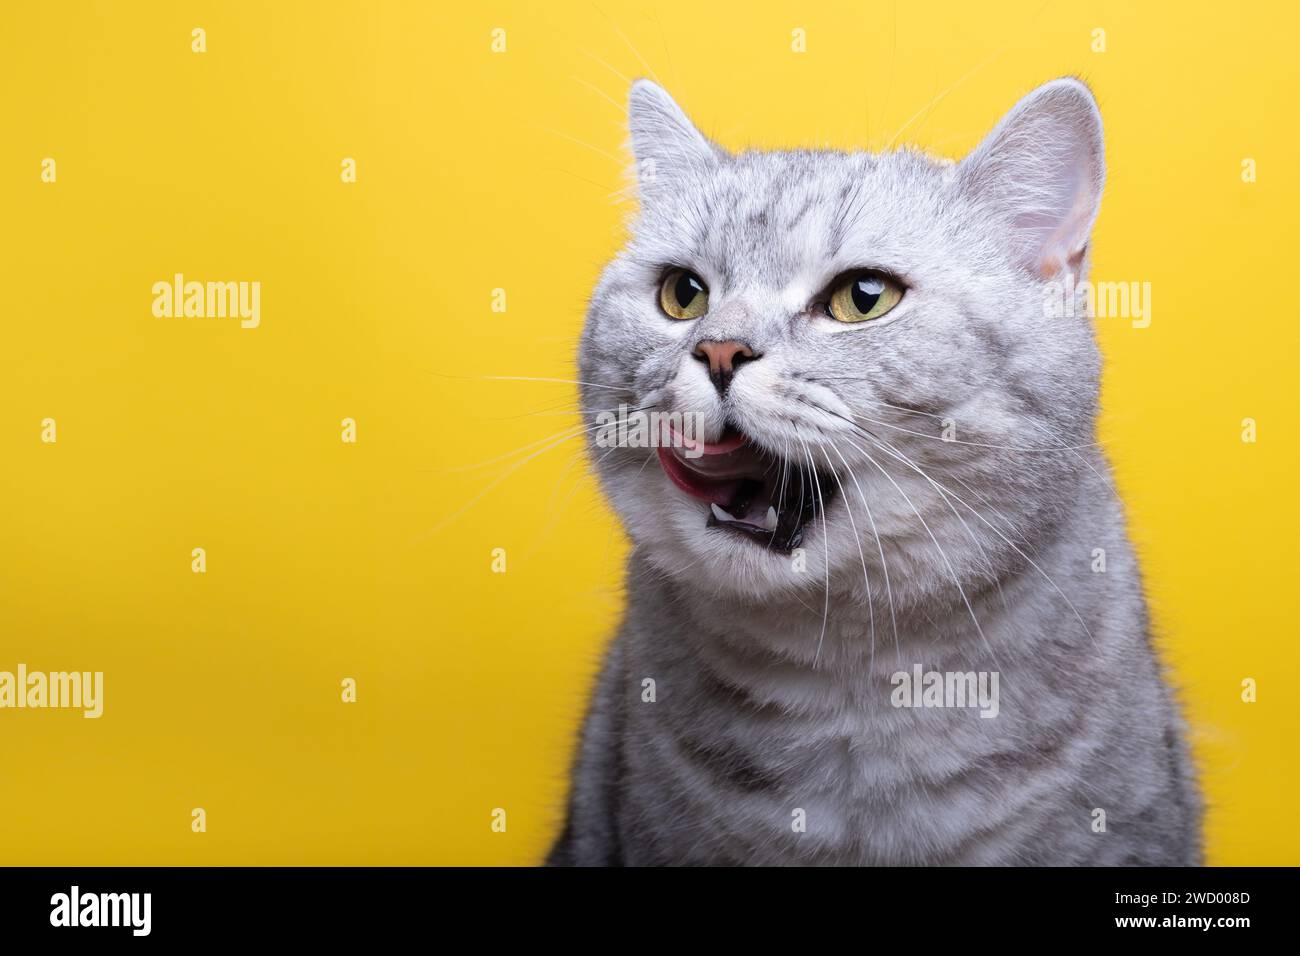 Tabby british shorthair cat on yellow background with tongue out Stock Photo